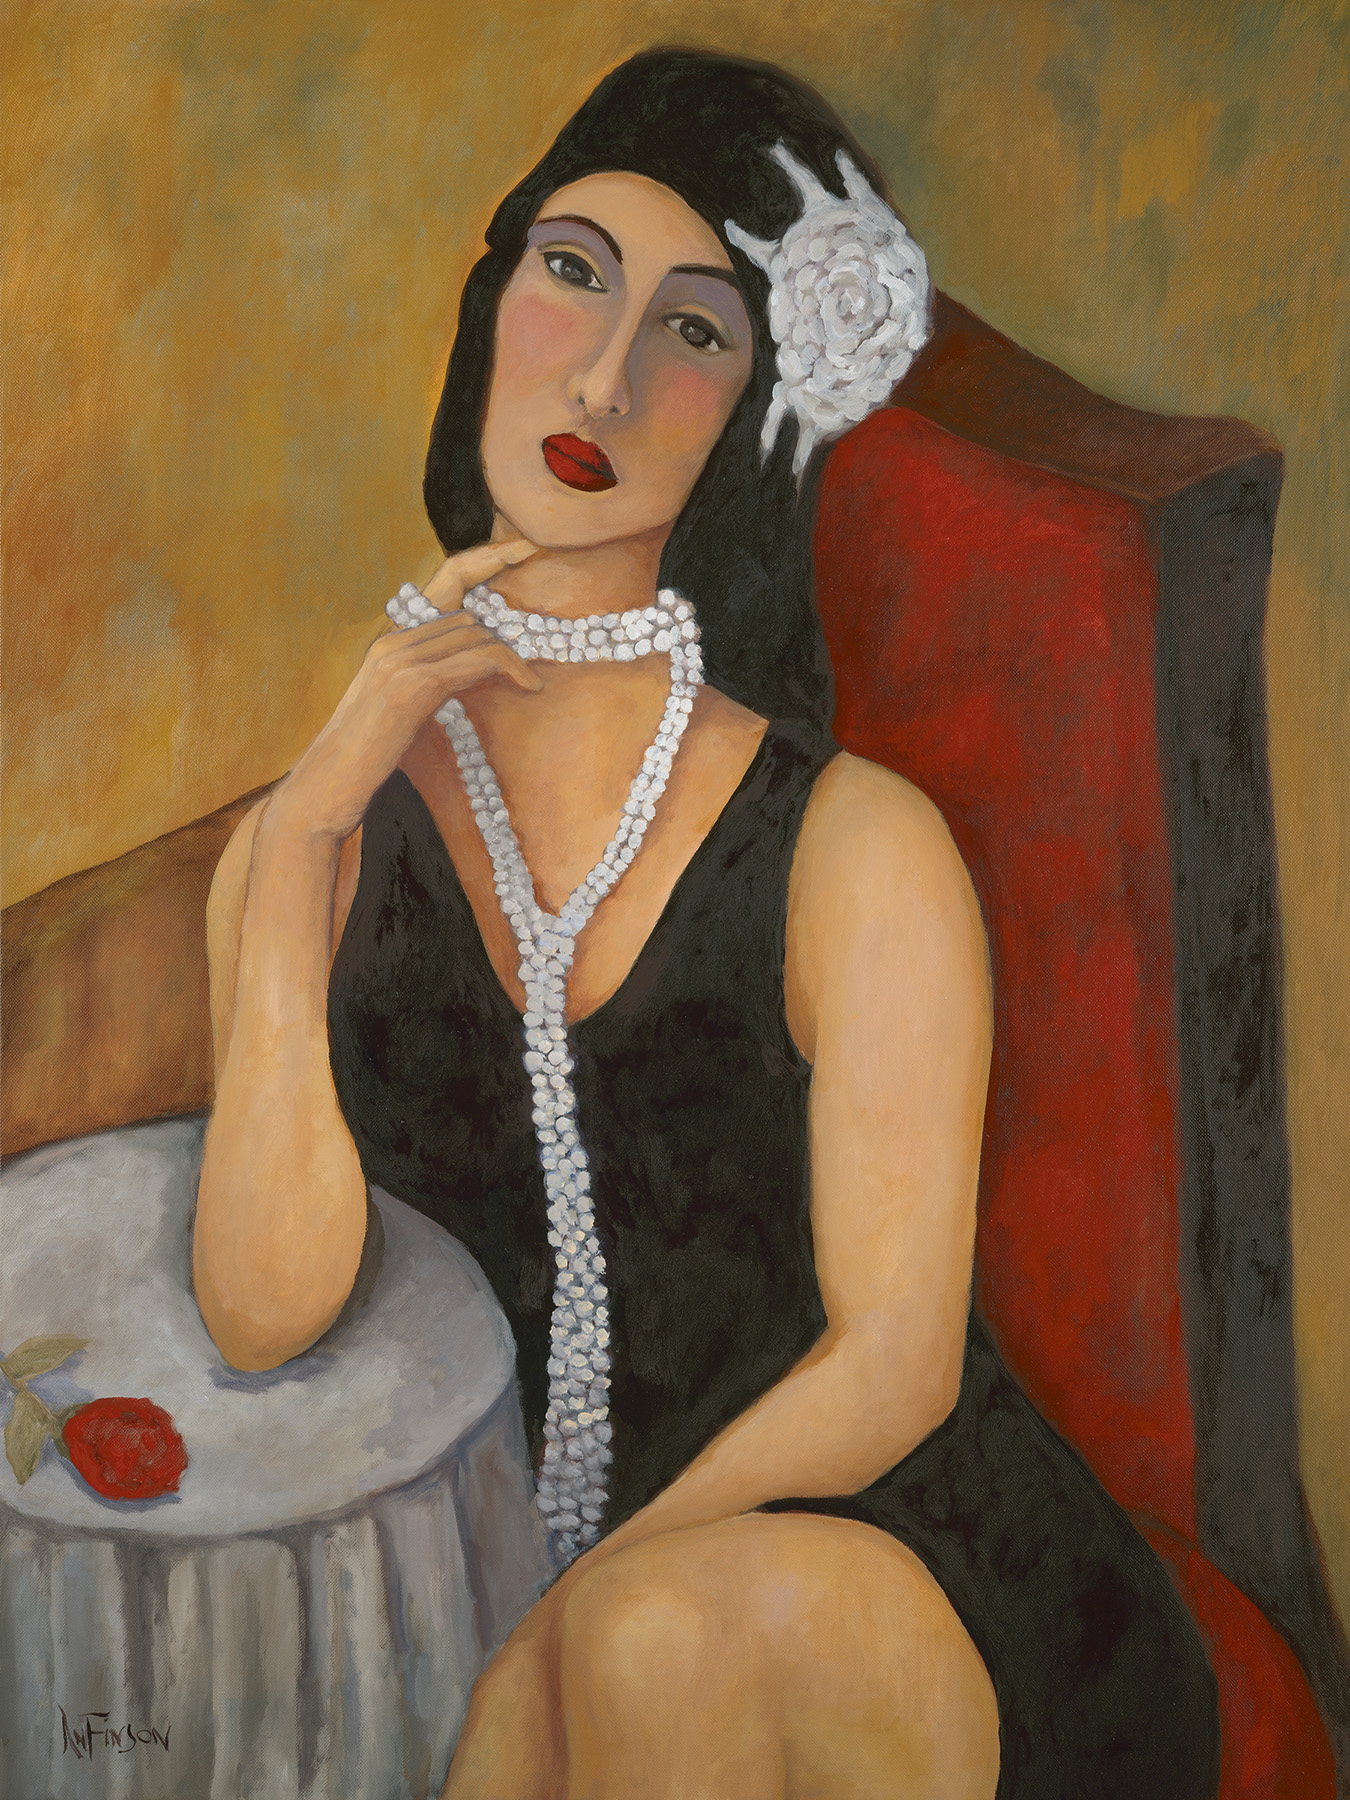  flapper girl&nbsp;  private collection  40 x 30 2014 